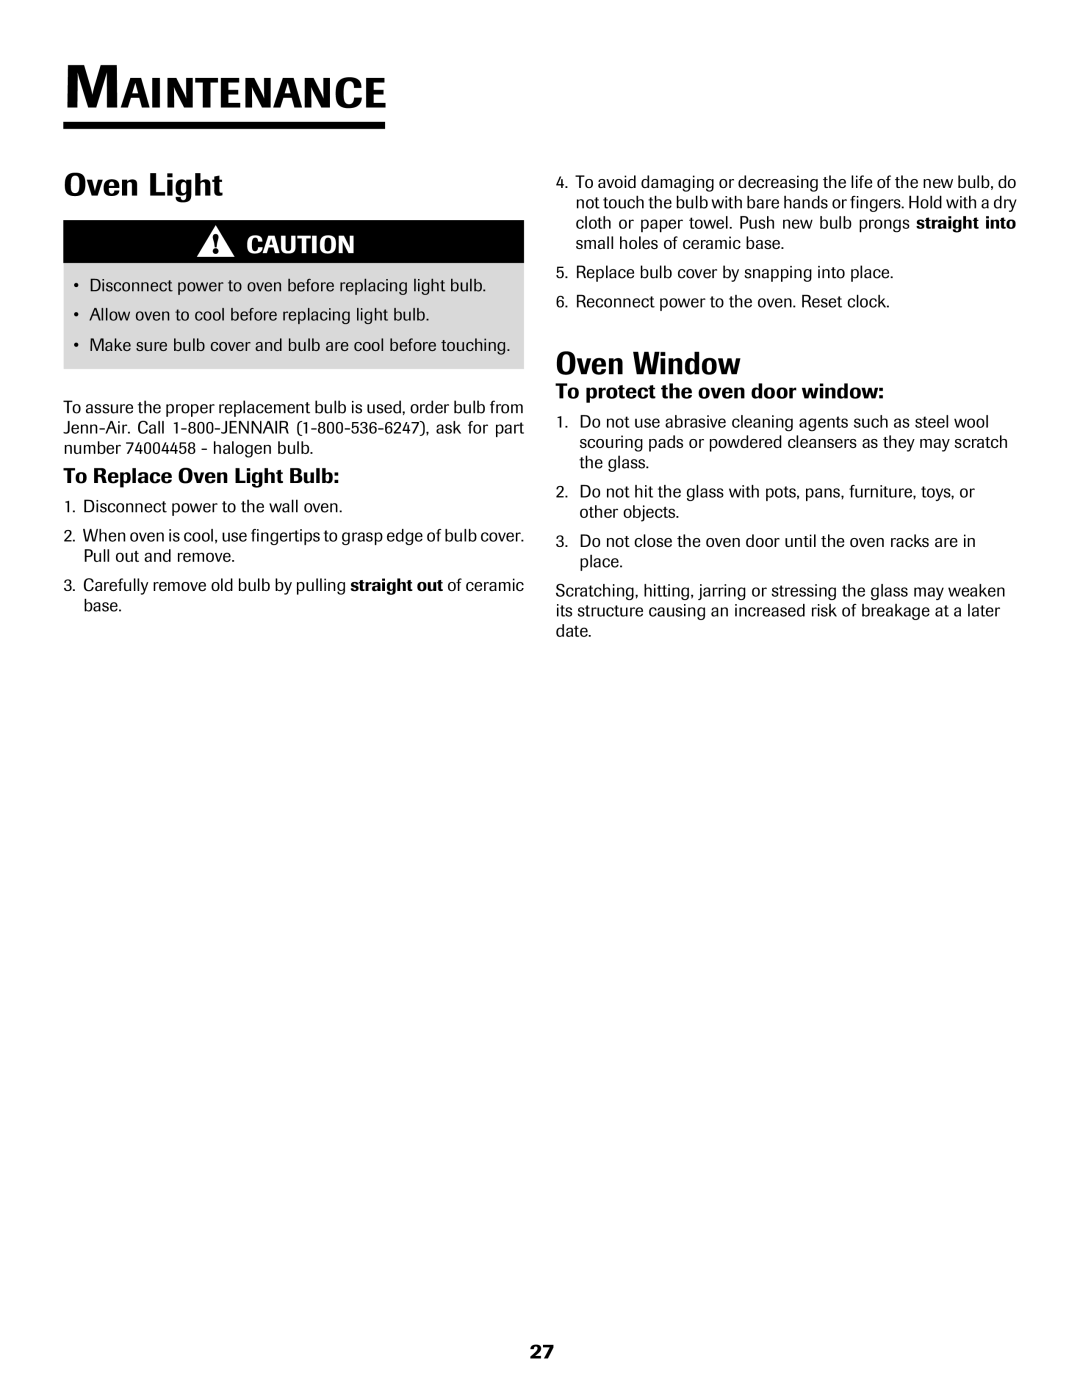 Jenn-Air 8112P212-60 warranty Maintenance, Oven Window, To Replace Oven Light Bulb, To protect the oven door window 